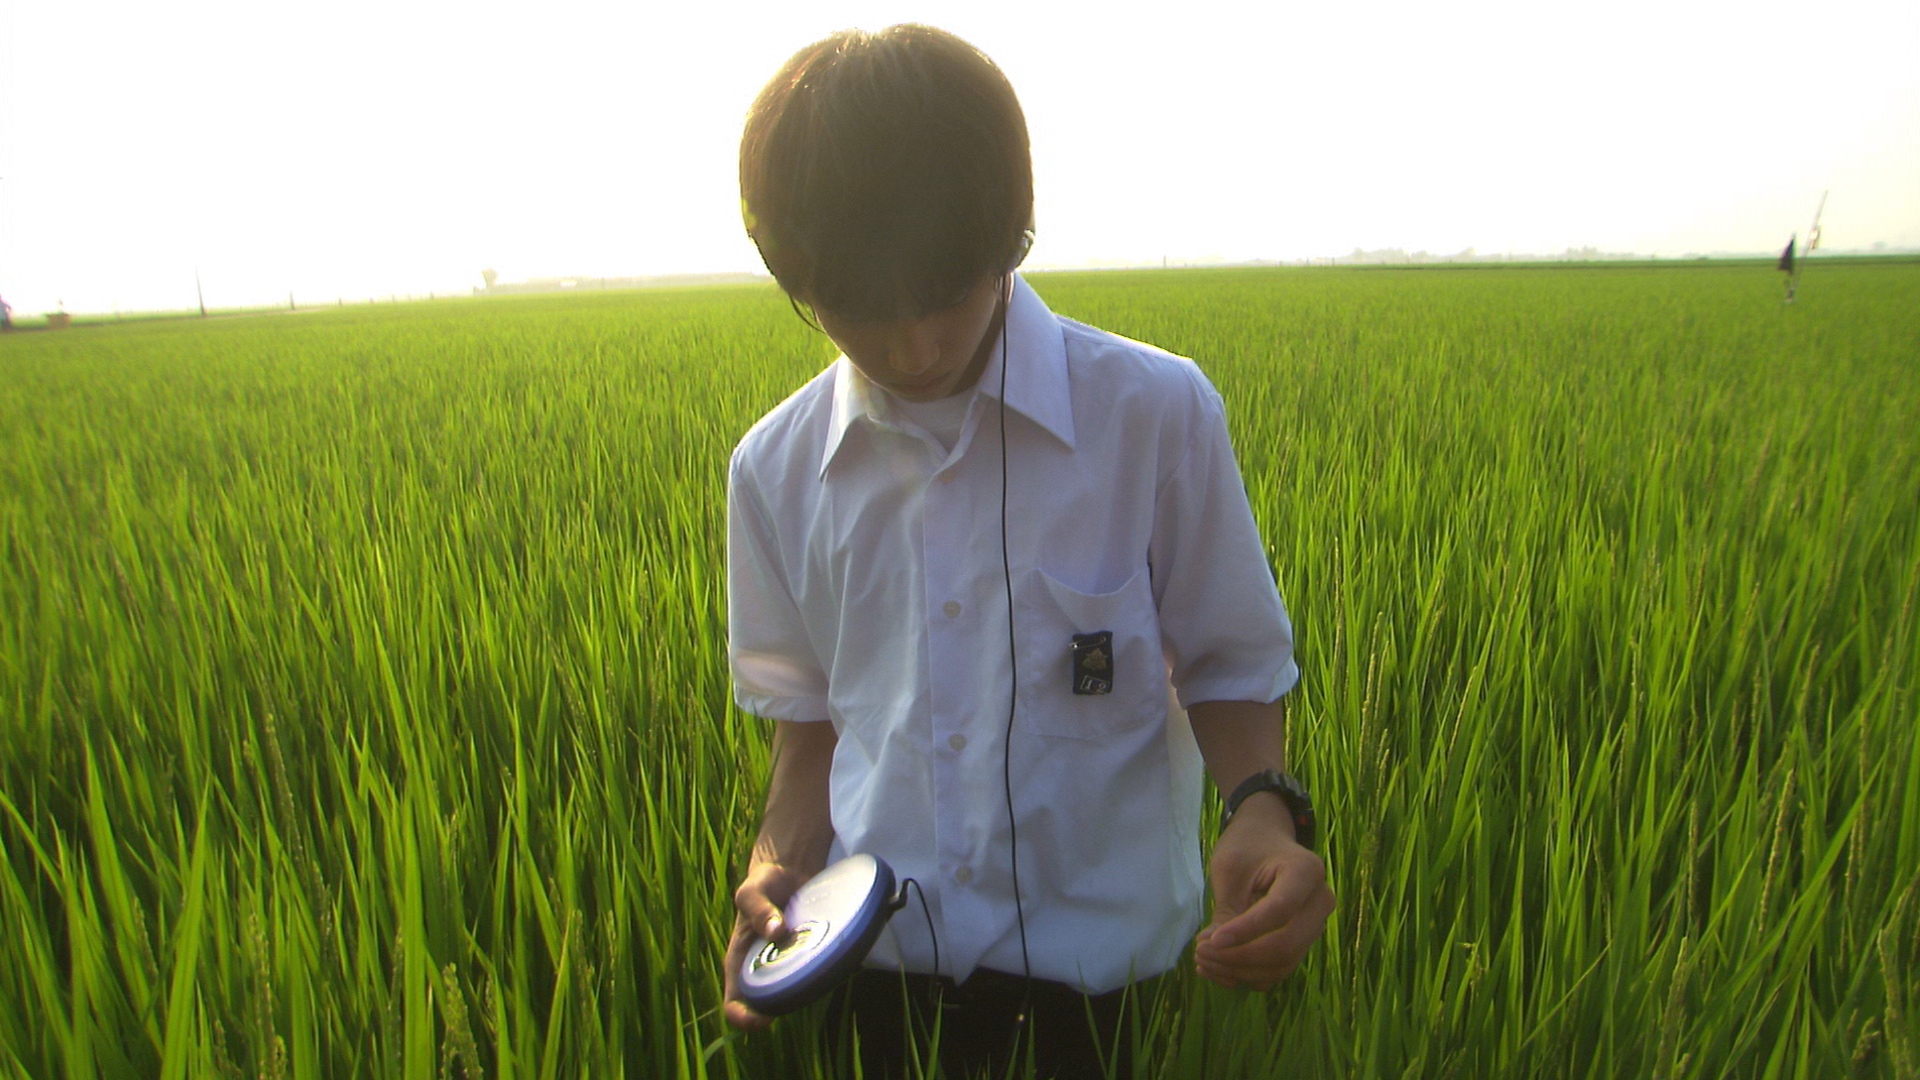 A person stands in a green field holding a discman